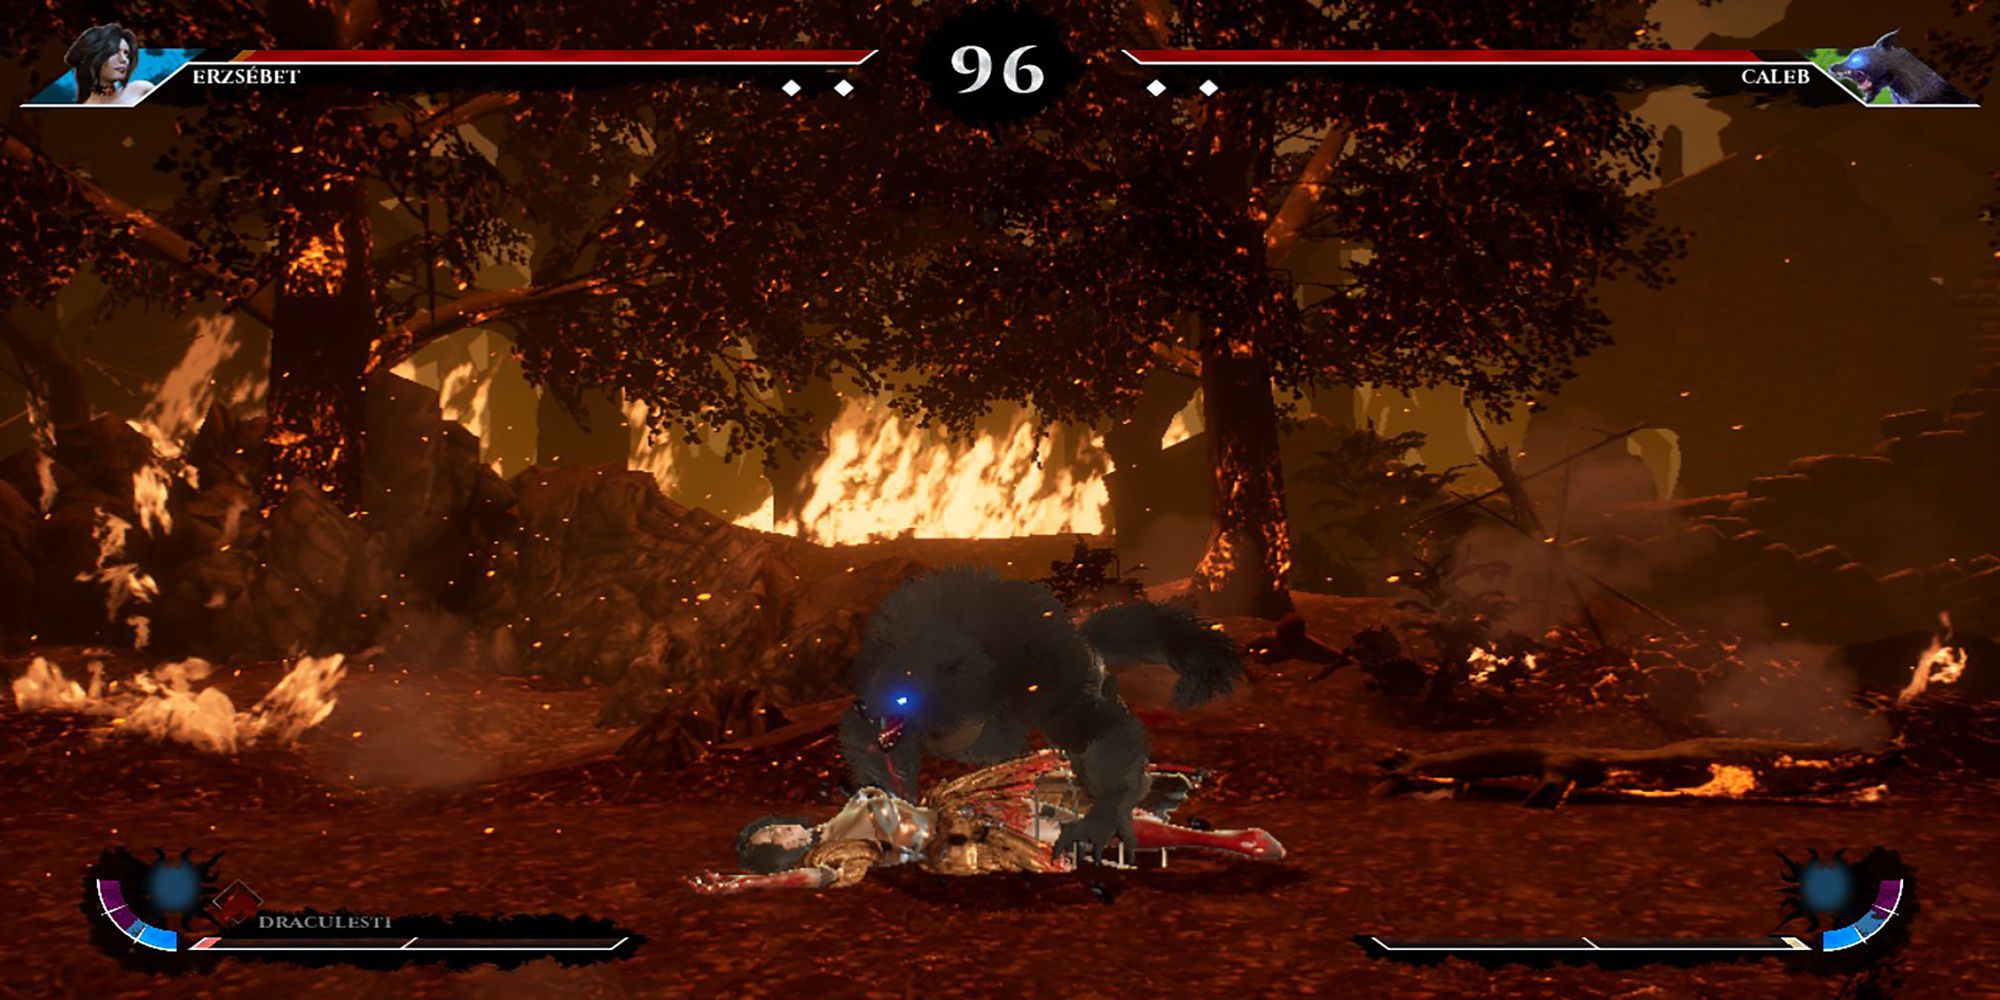 Caleb, a werewolf, tackles Erzsebet in a burning forest in Omen Of Sorrow.